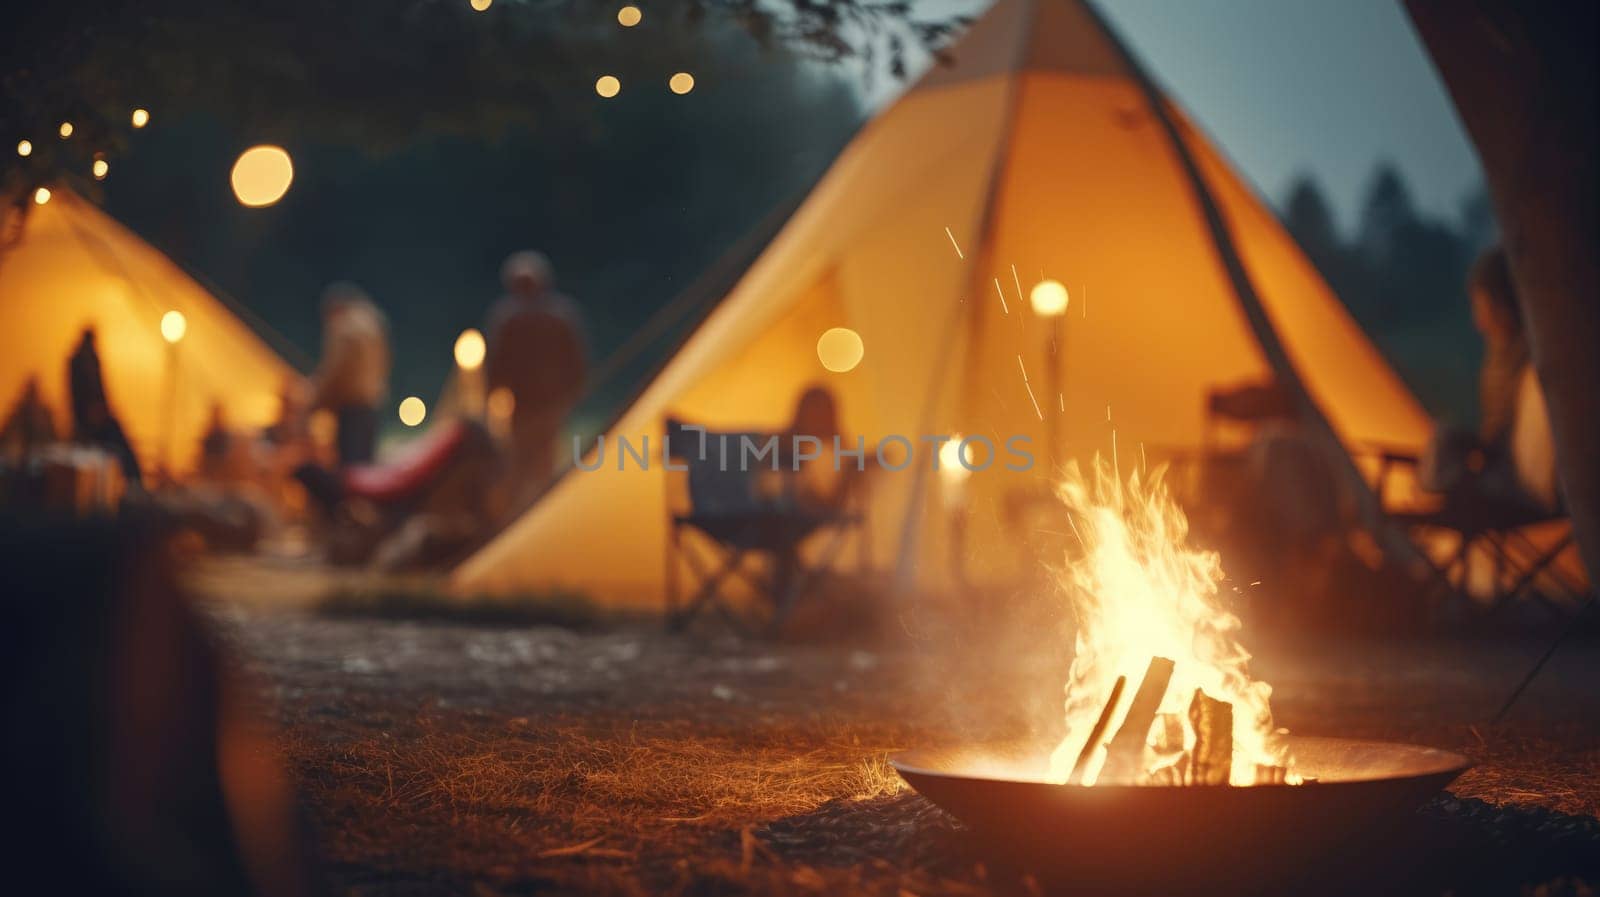 Picnic fire in focus. Blurred background with people and the yellow tent by natali_brill